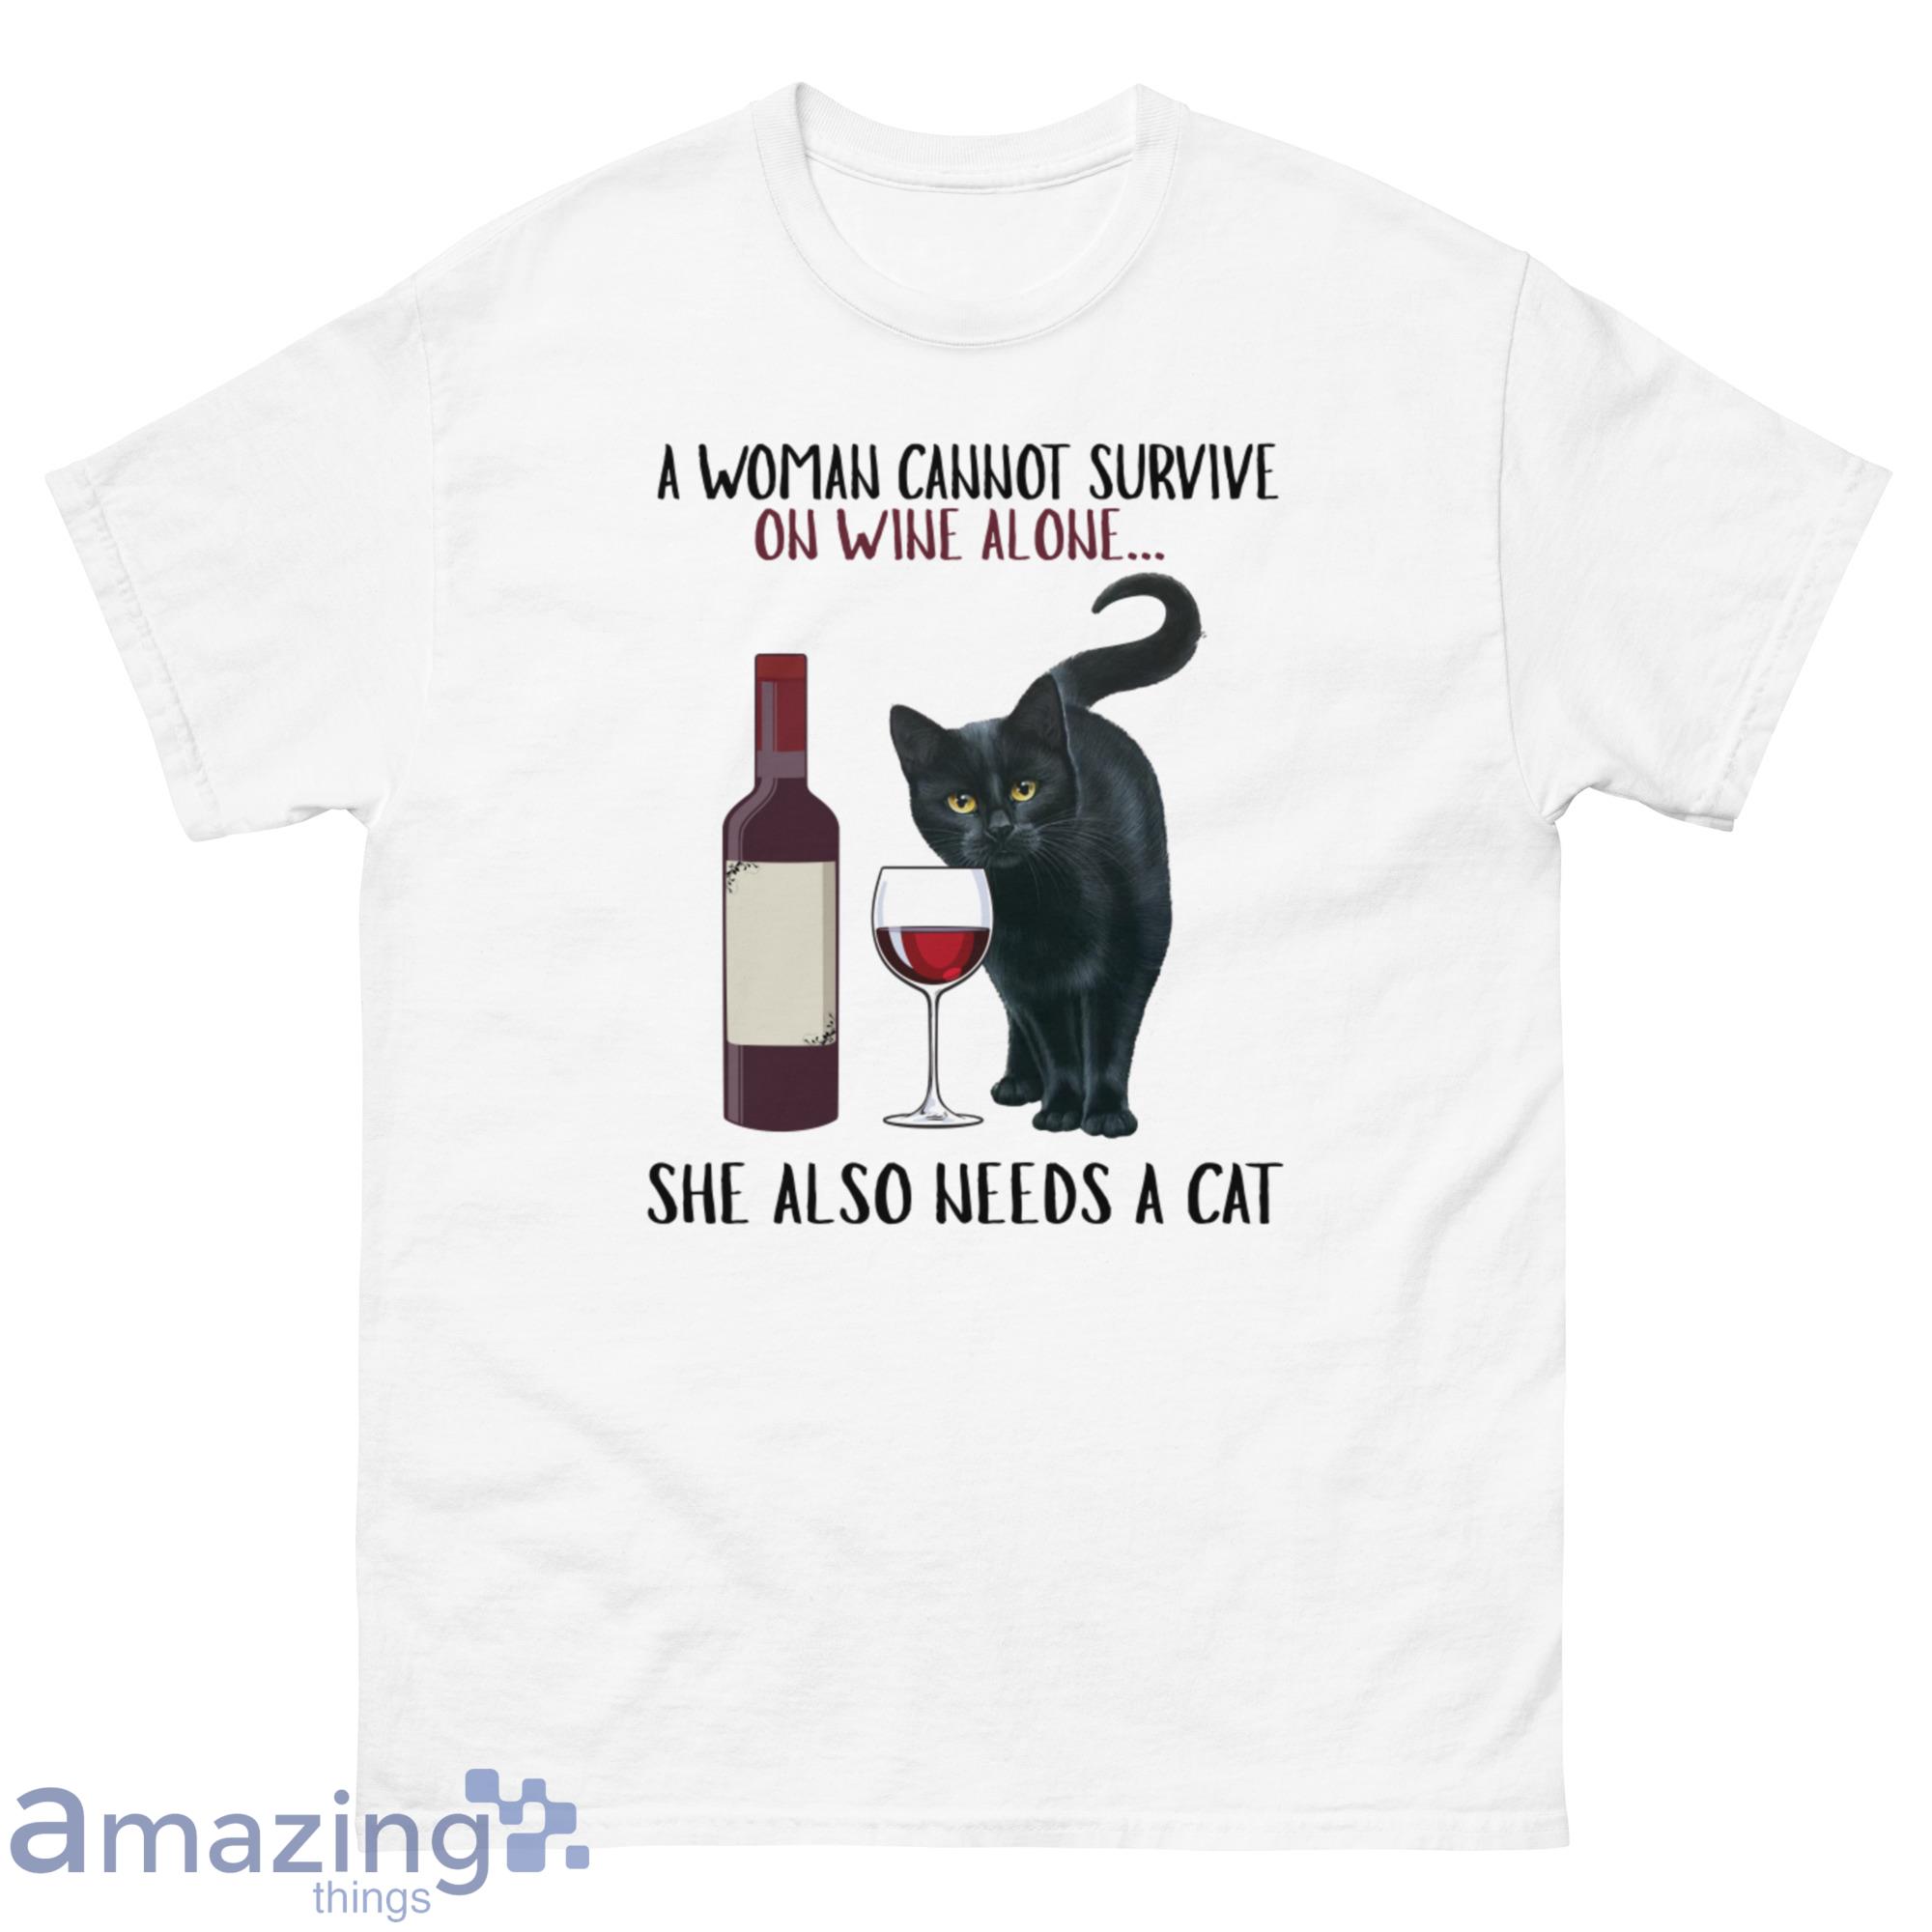 A Woman Cannot Survive On Wine Alone She Also Needs A Cat Black Cat And Wine Shirt - G500 Men’s Classic T-Shirt-1